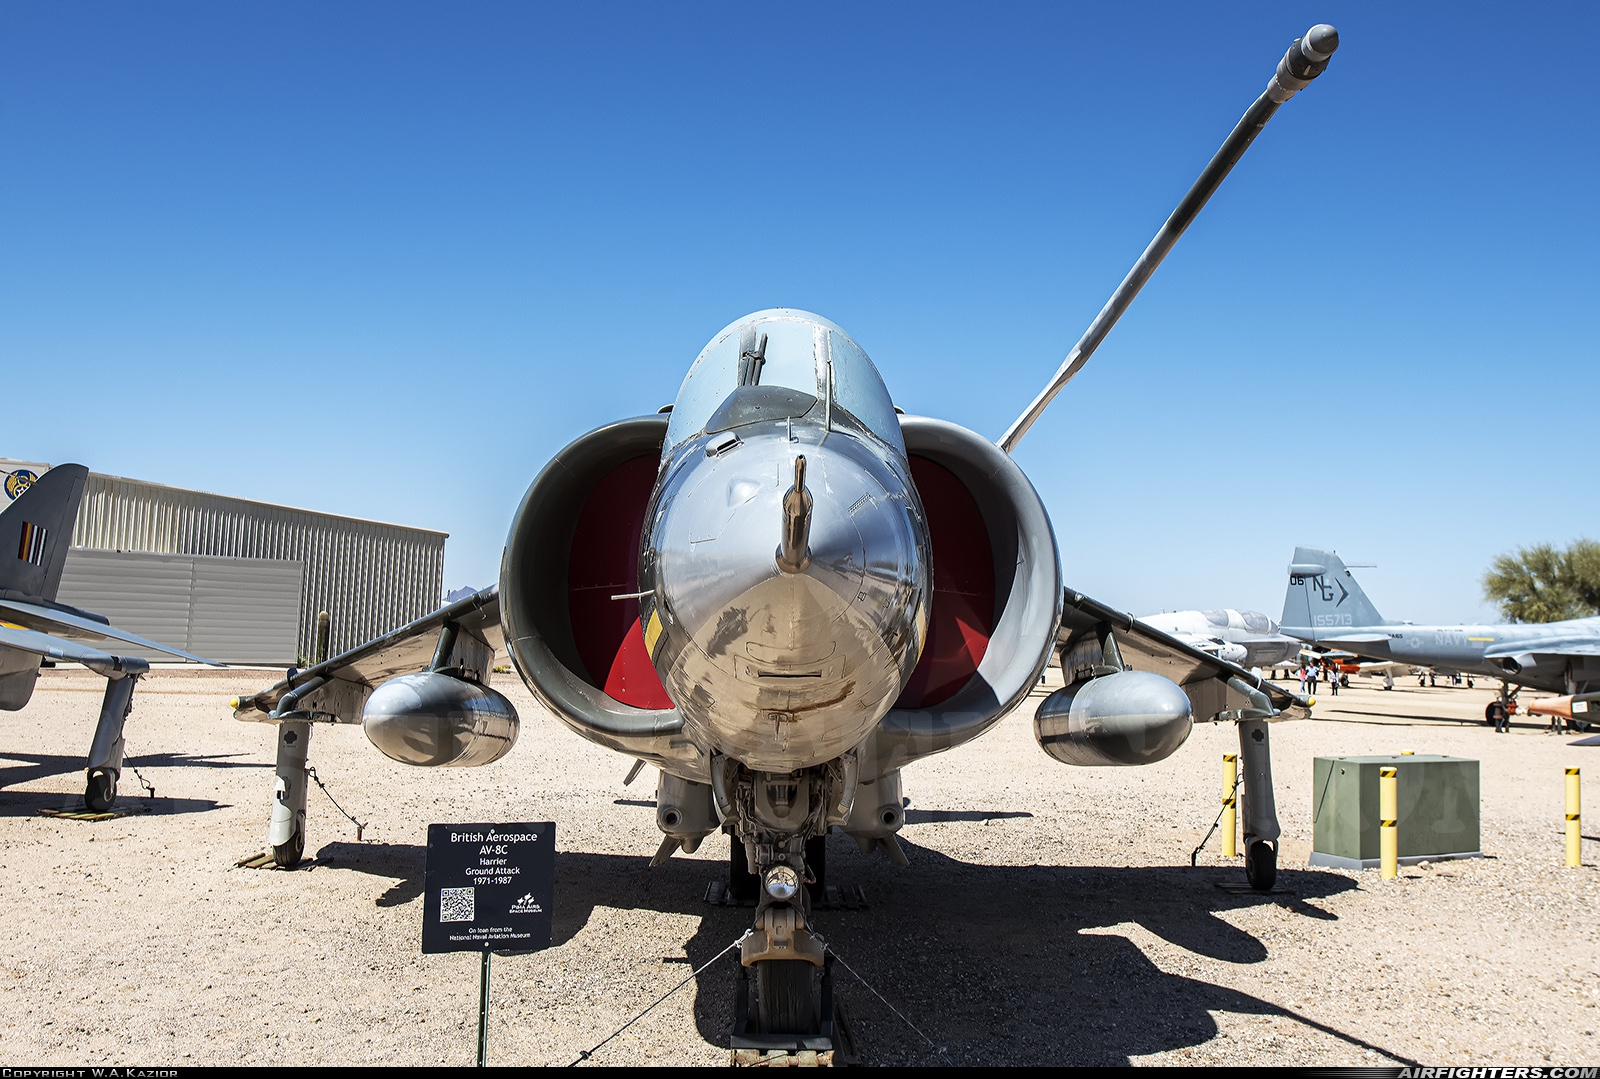 USA - Marines Hawker Siddeley TAV-8A Harrier 159382 at Tucson - Pima Air and Space Museum, USA